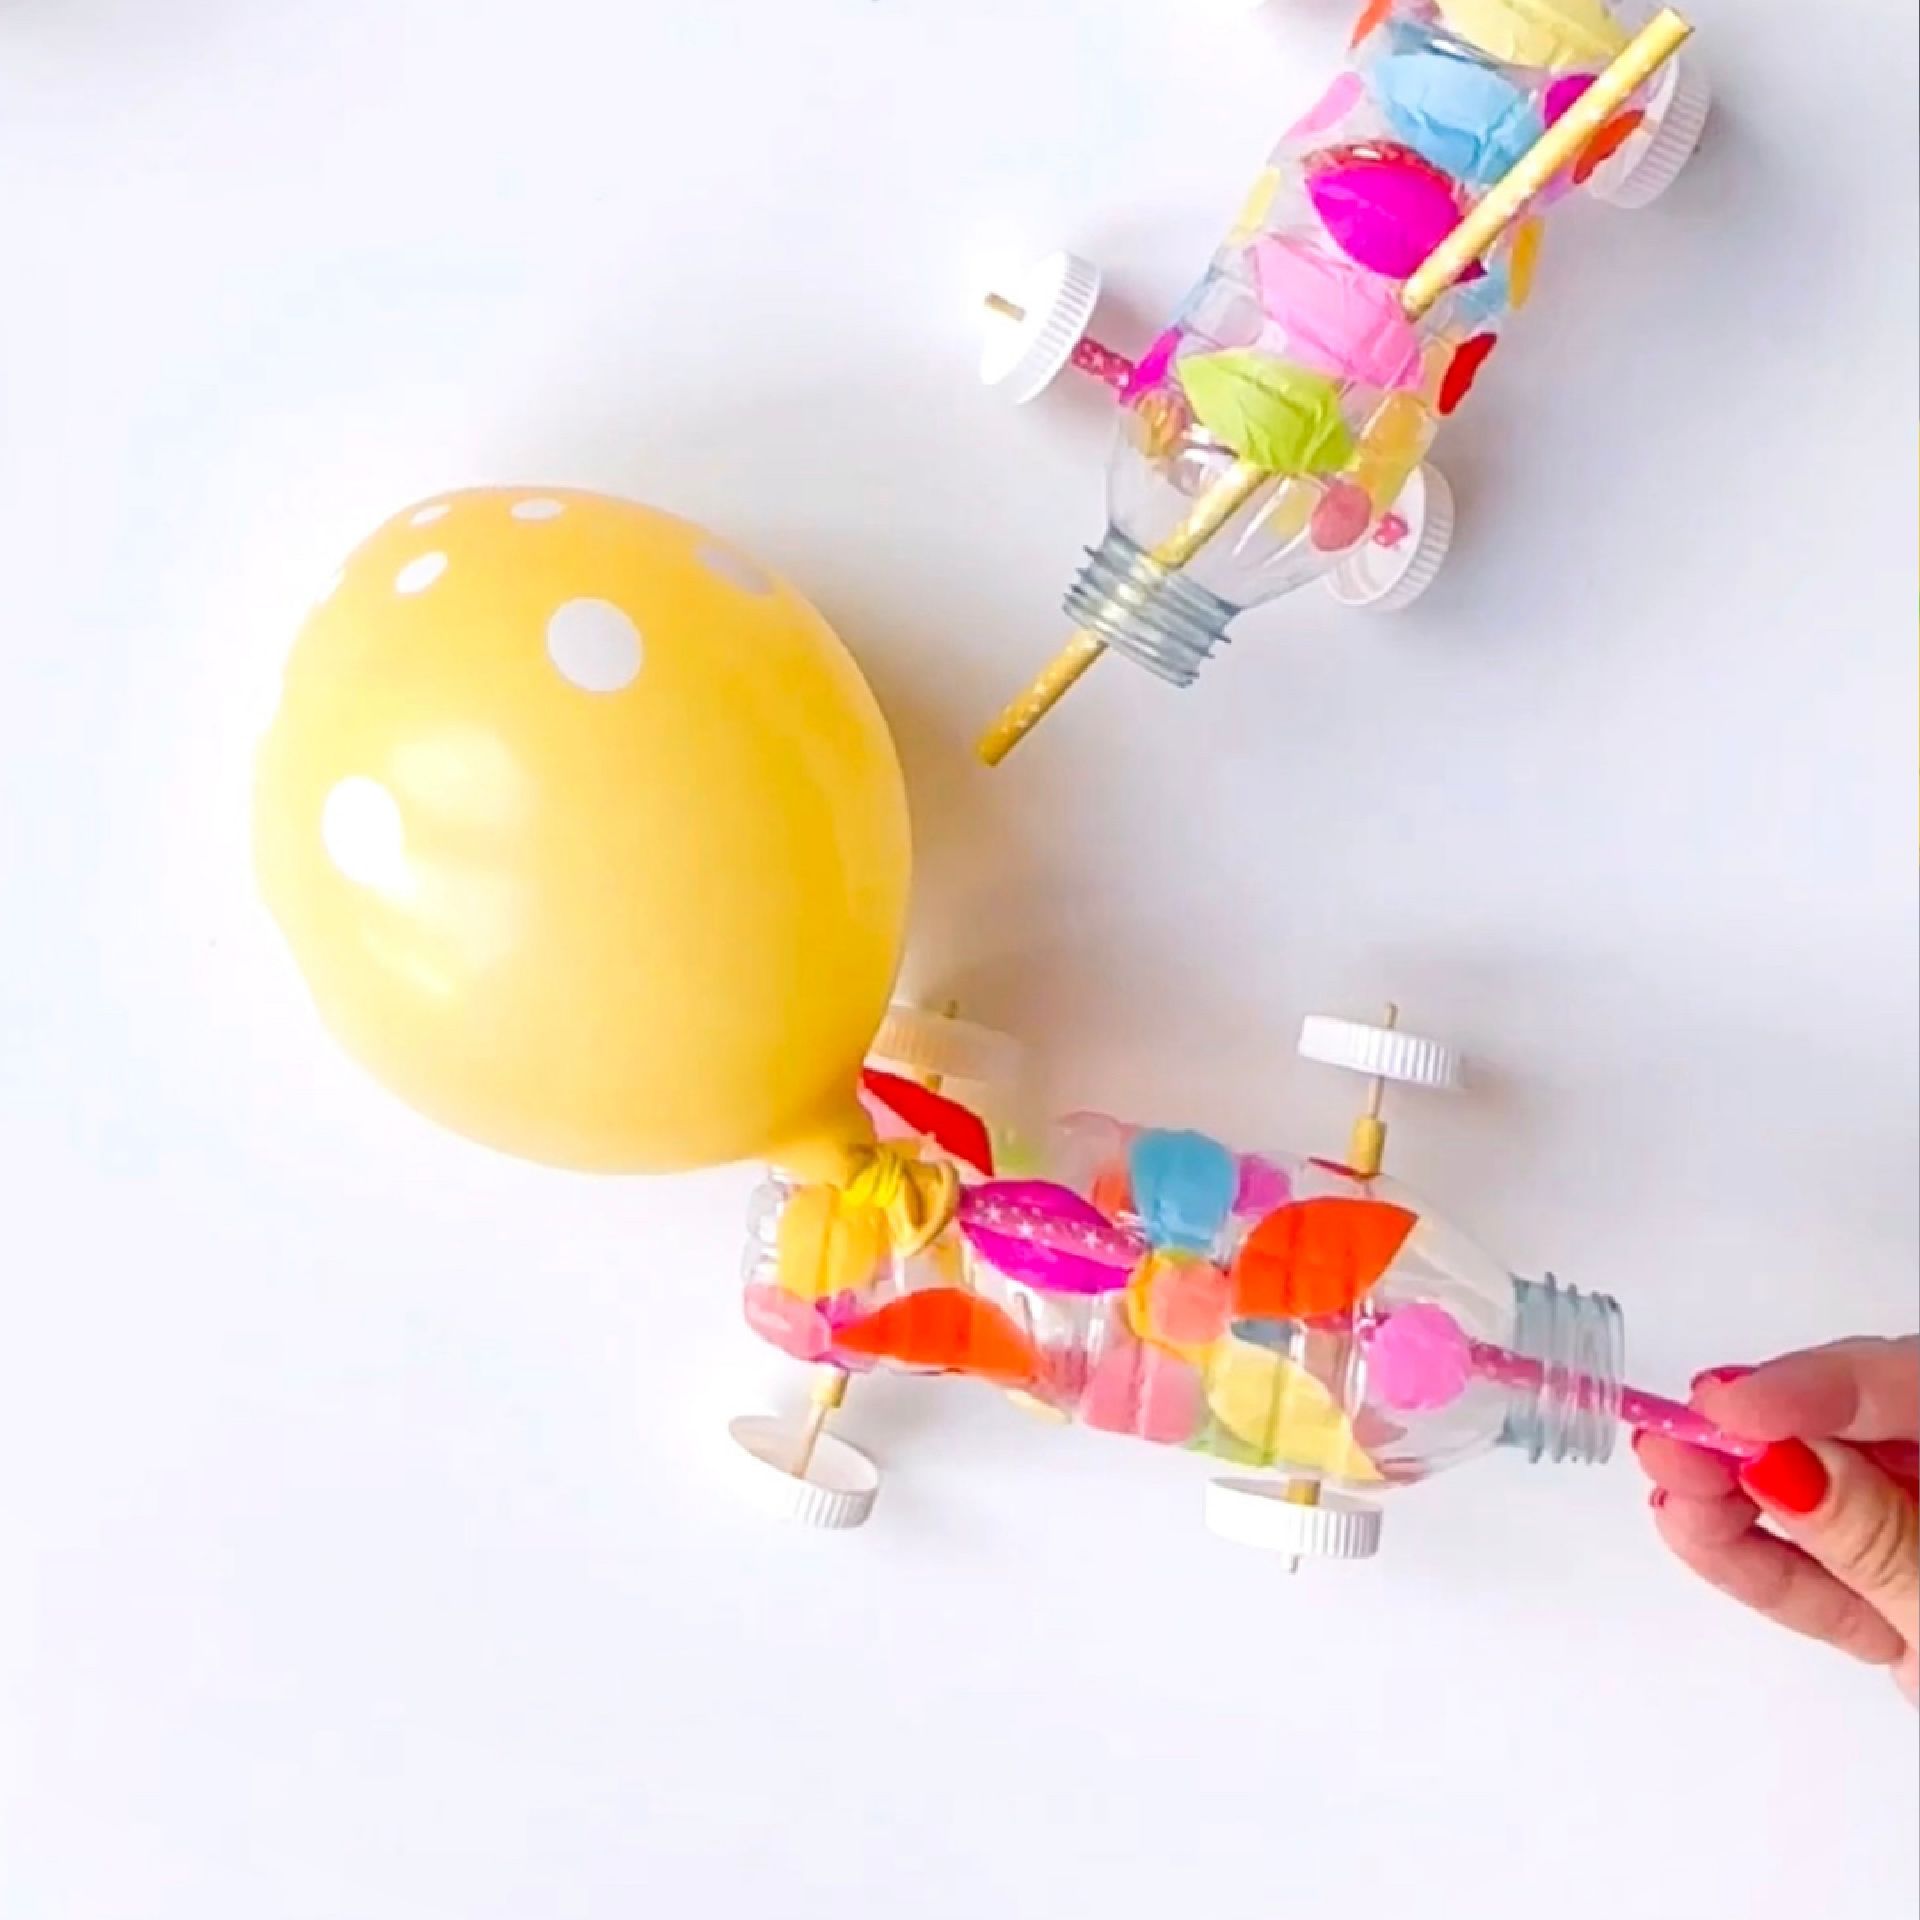 A completed balloon car